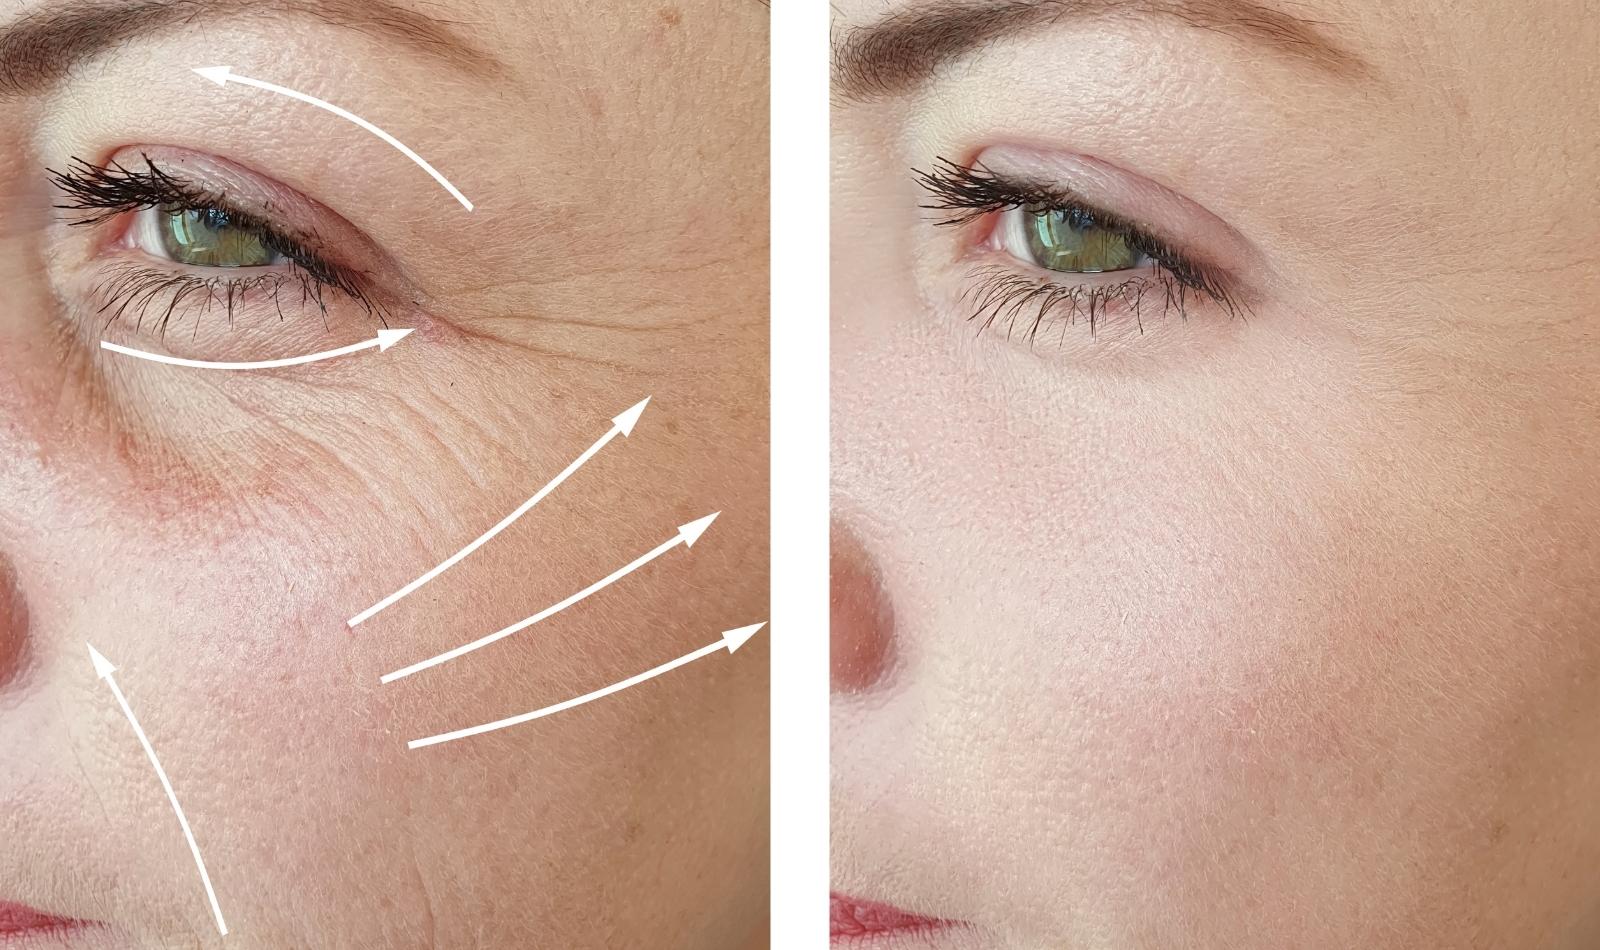 Example effects that can be acheived -microneedling with radiofrequency before and after